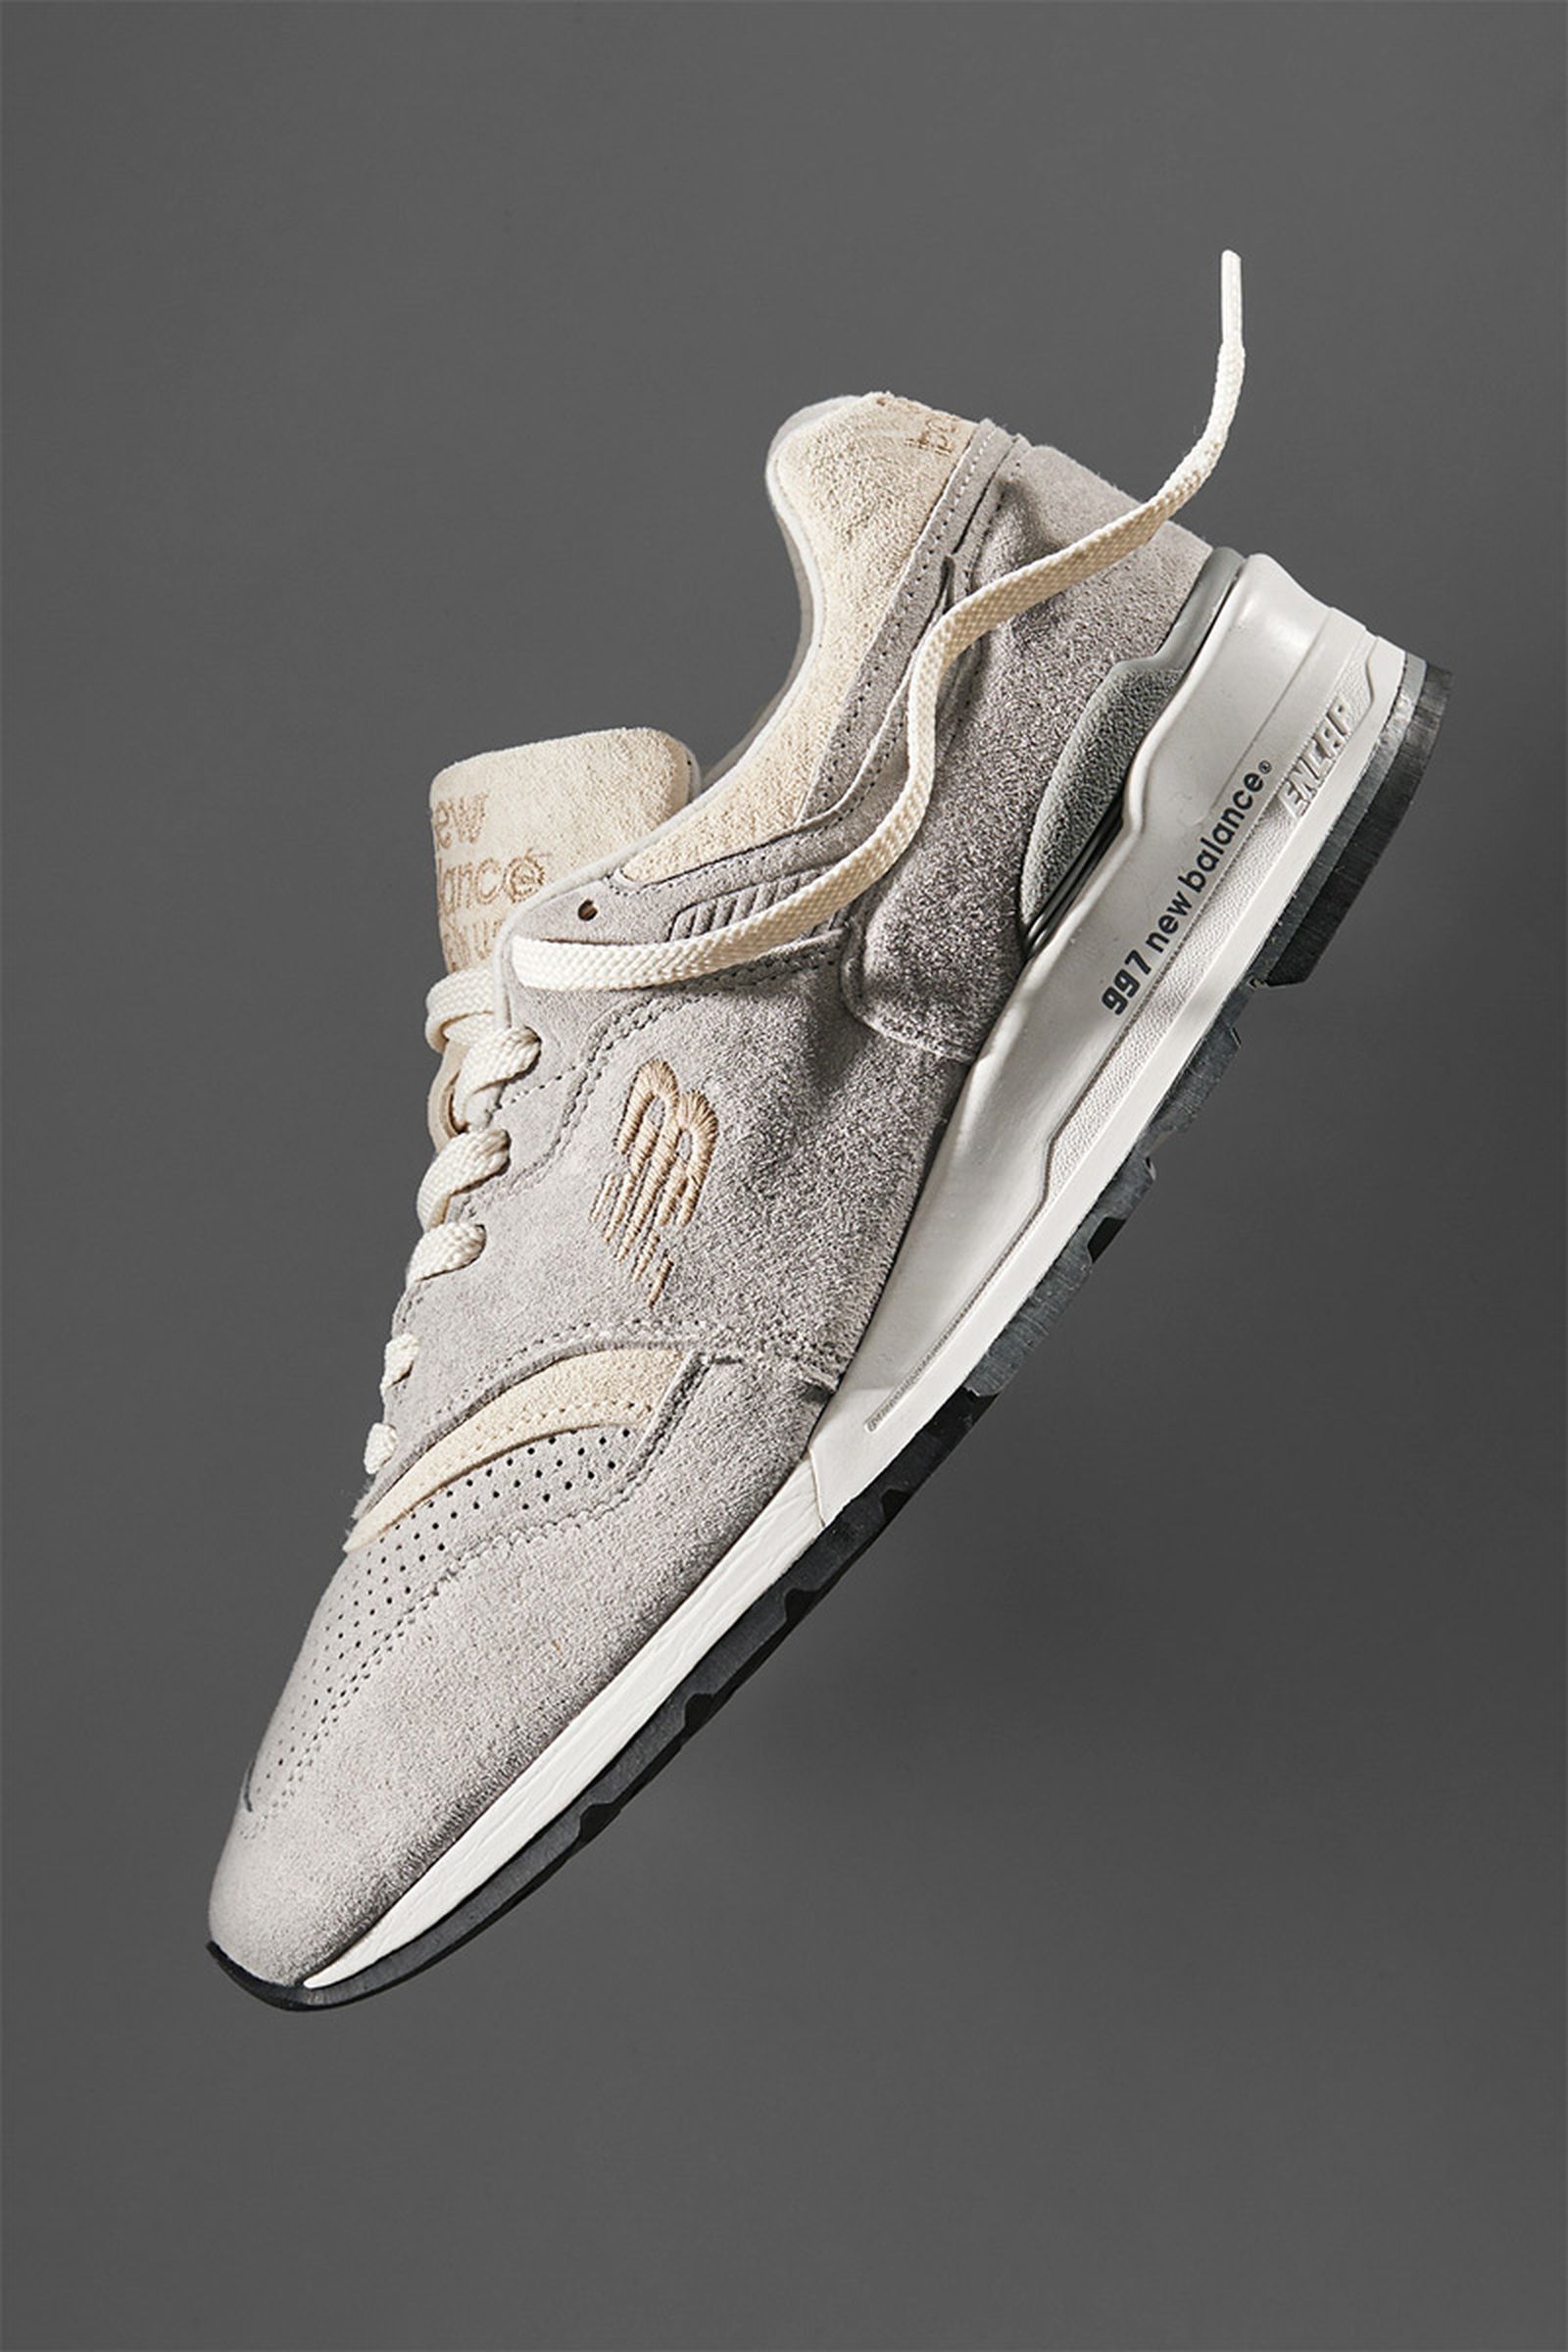 Todd Snyder x New Balance Triborough 997: Official Release Info